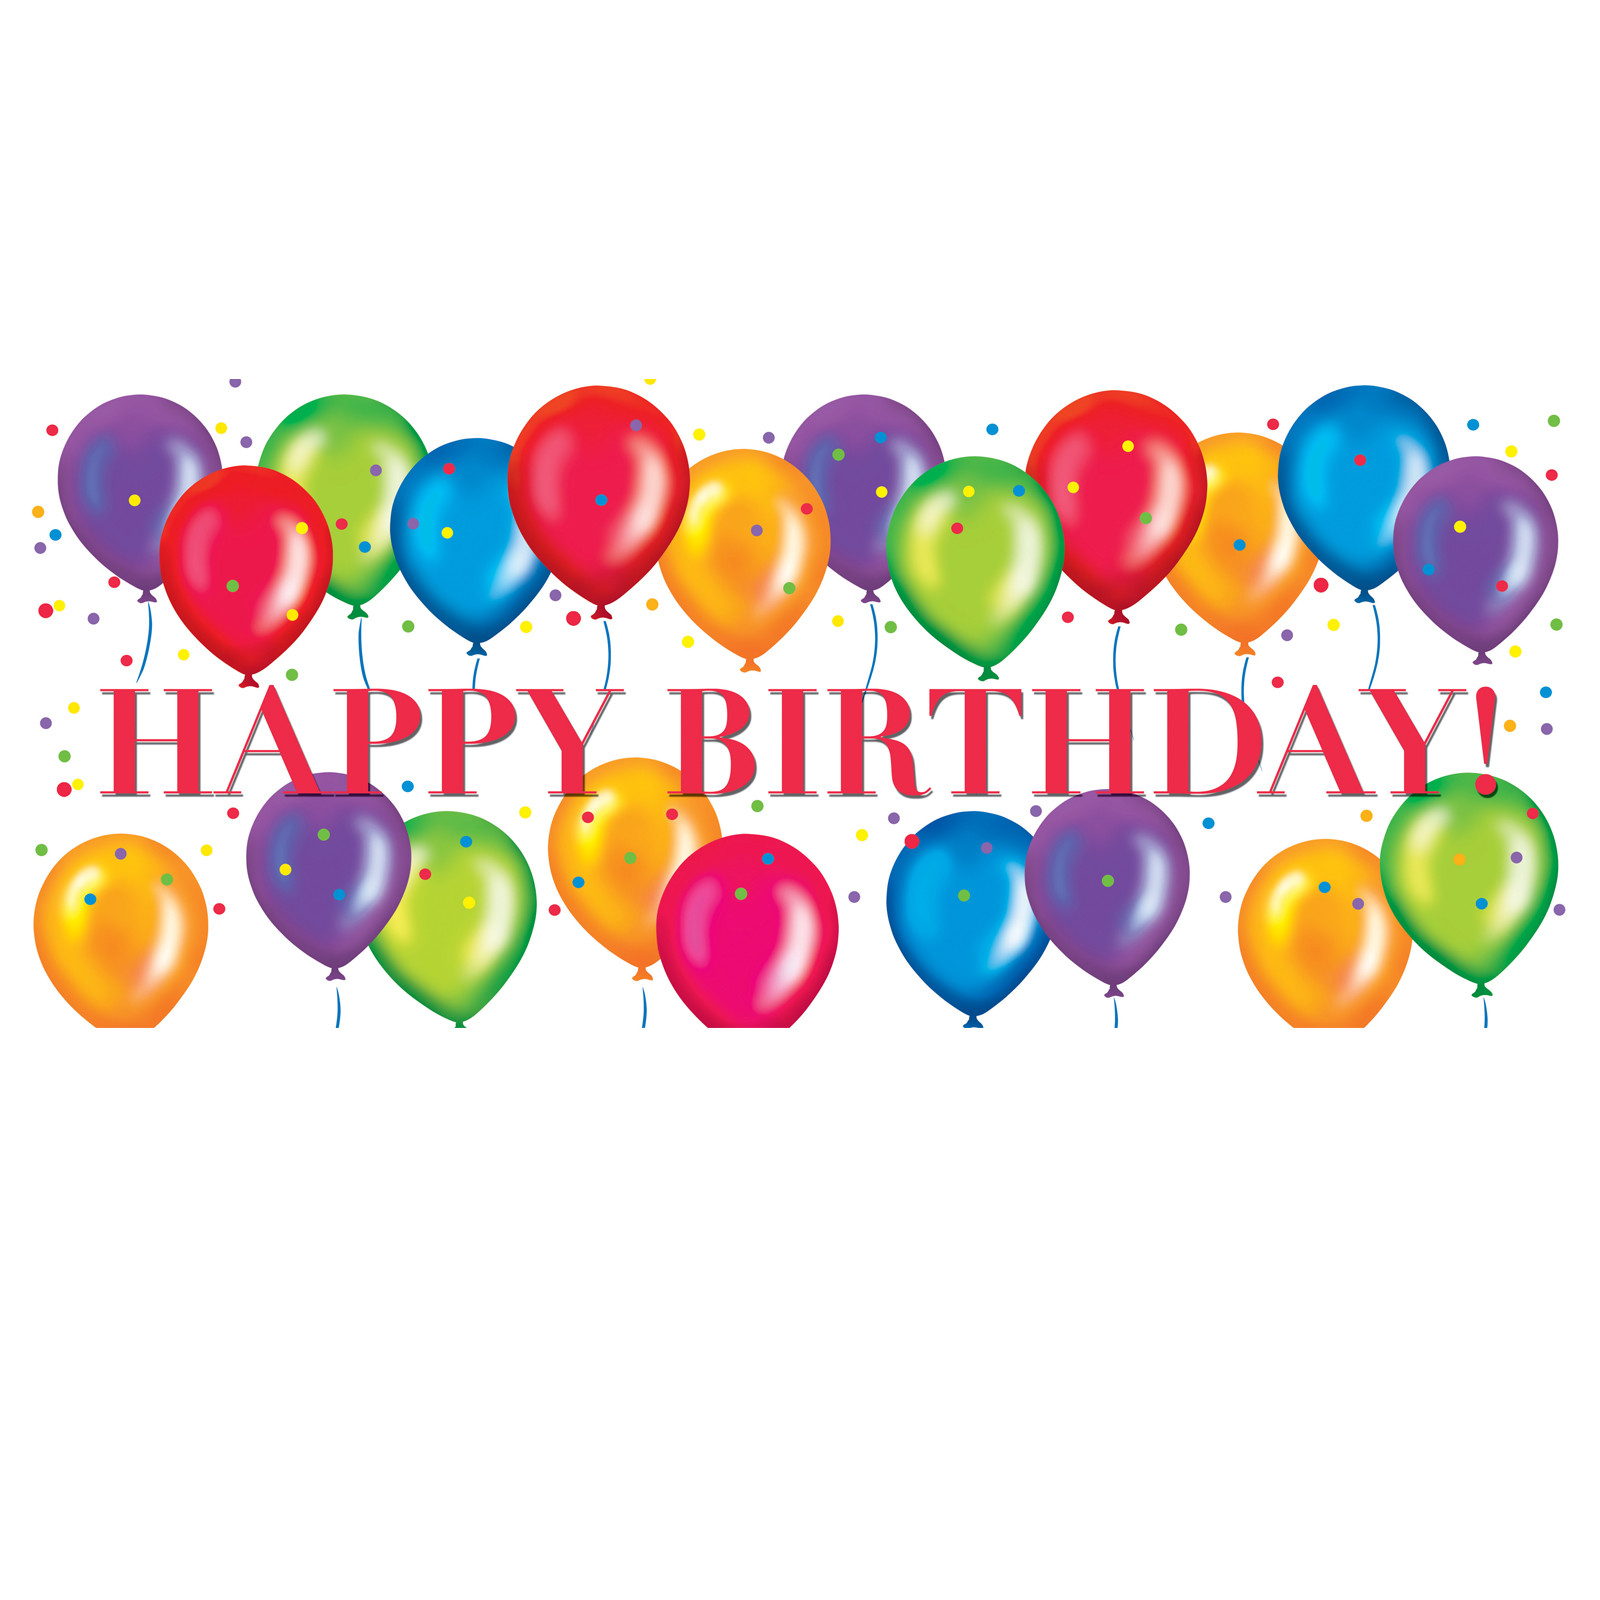 Happy Birthday Balloons Clipart at GetDrawings | Free download